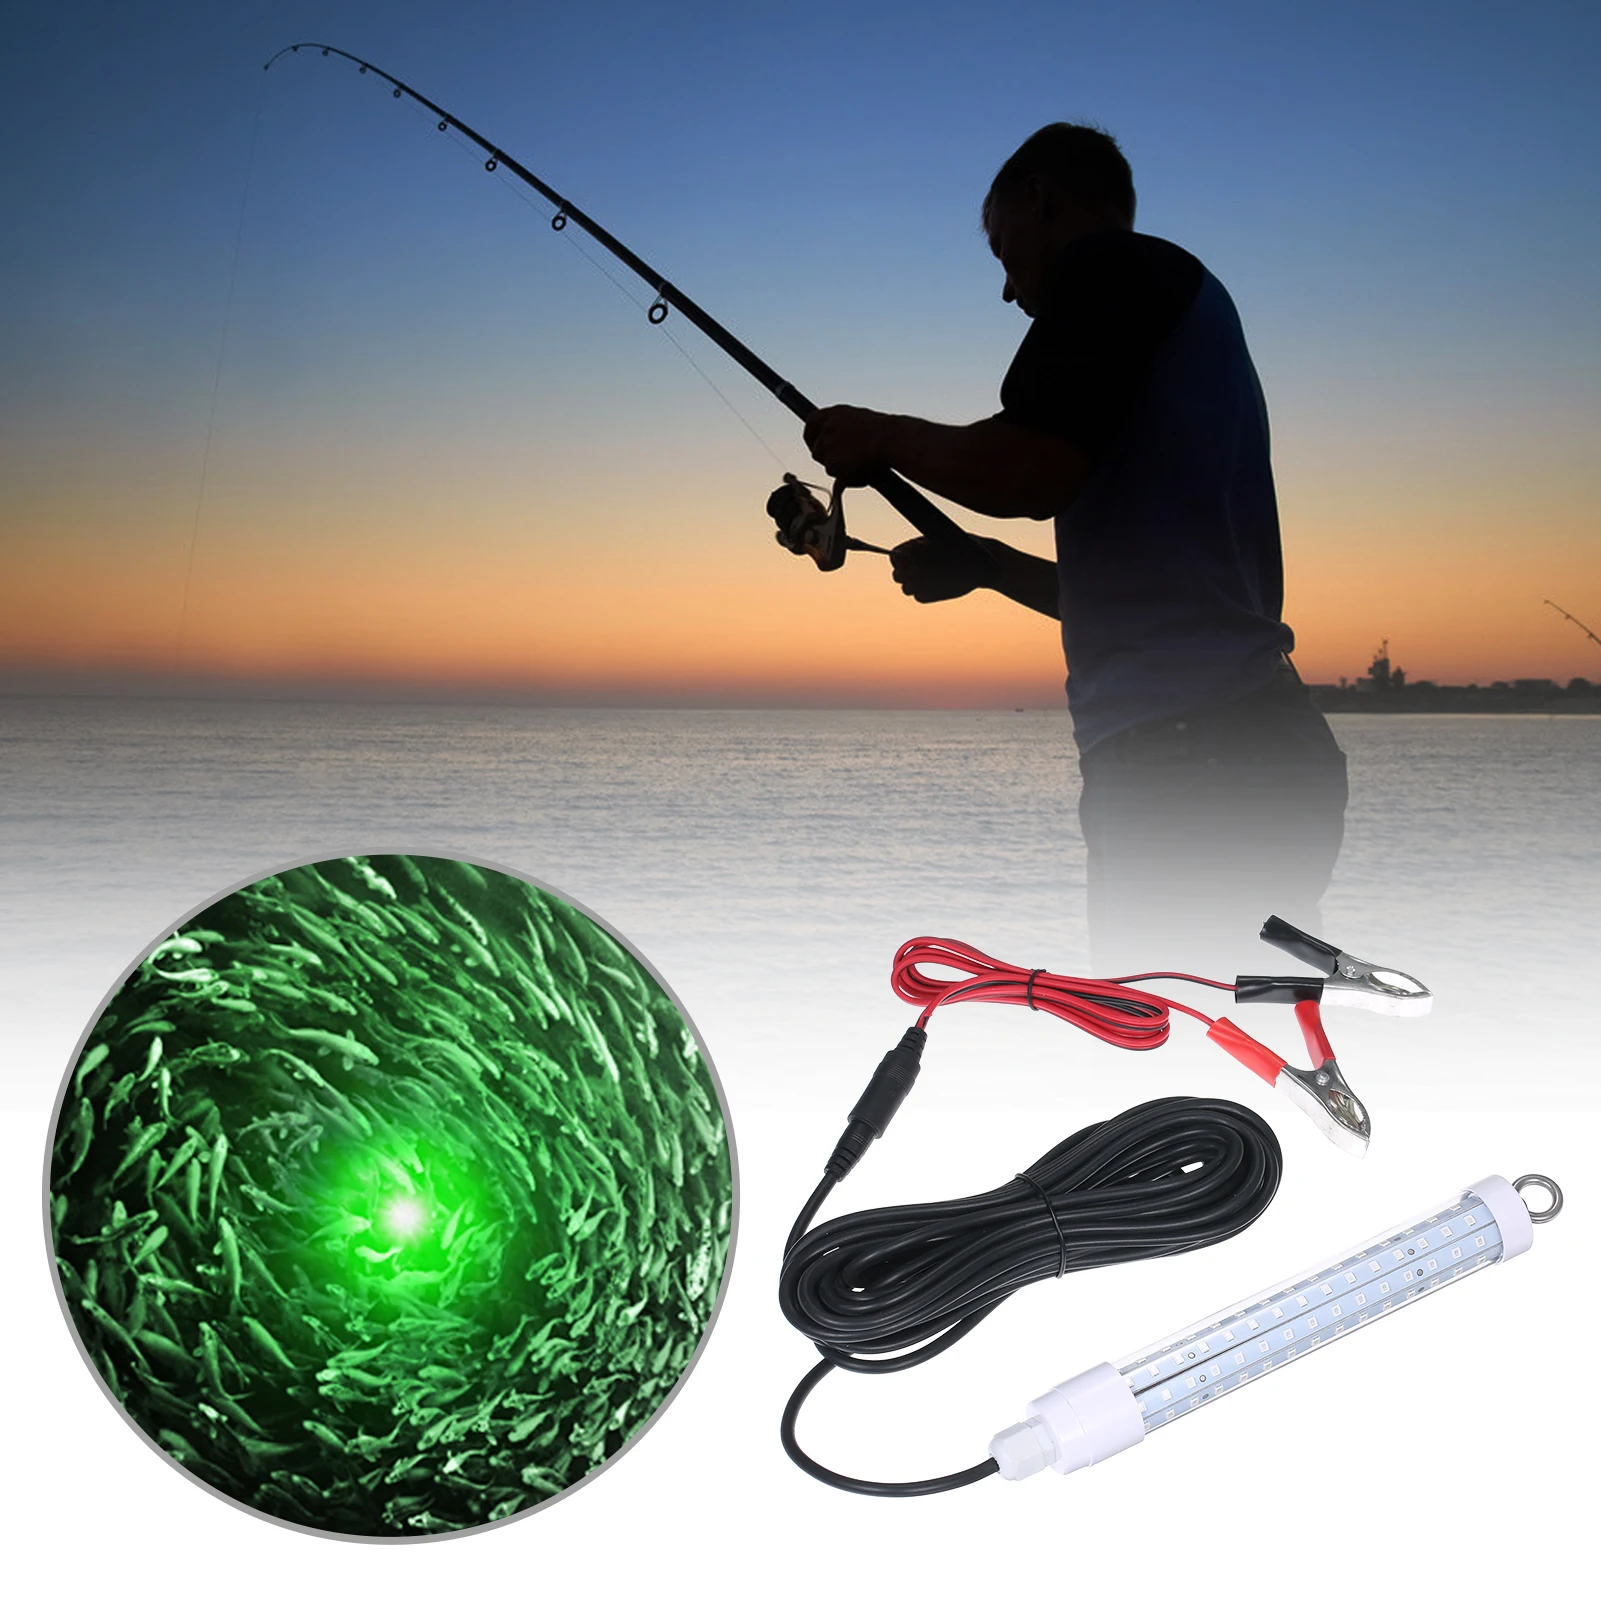 

Underwater Night Fishing Light IP68 Lure Bait 12-24V 10W 120LEDs 1000lm LEDs Submersible Fish Finder Lamp with 6m/19.69ft Cord